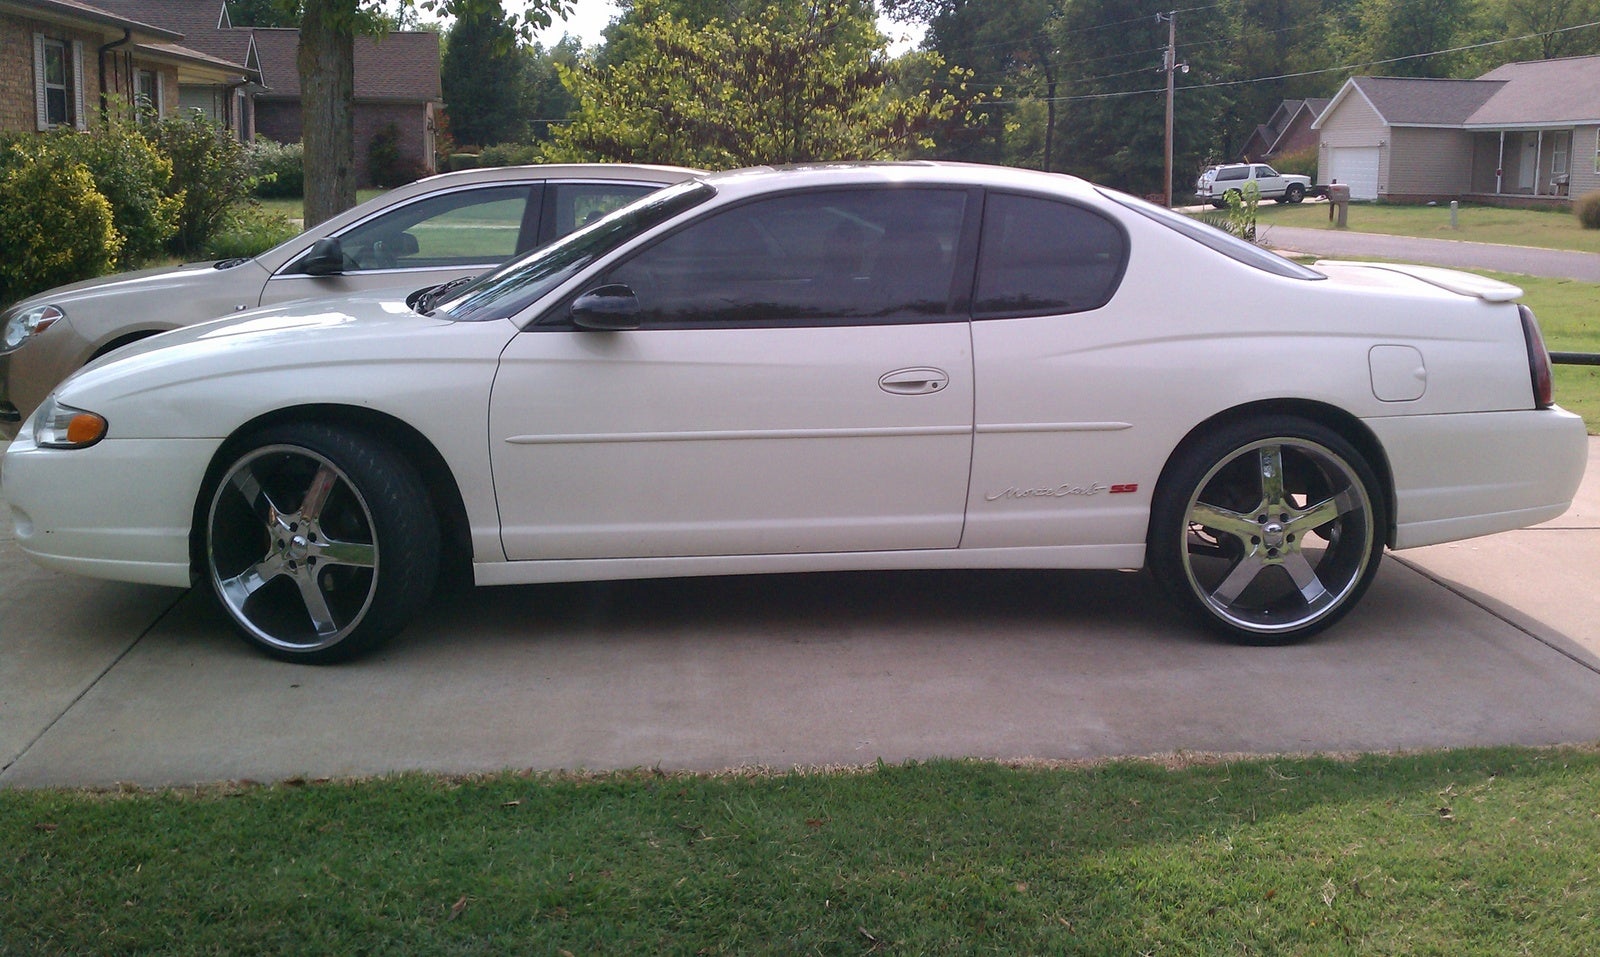 2001 Chevrolet Monte Carlo SS - Pictures - Picture of 2001 Chevrolet ...